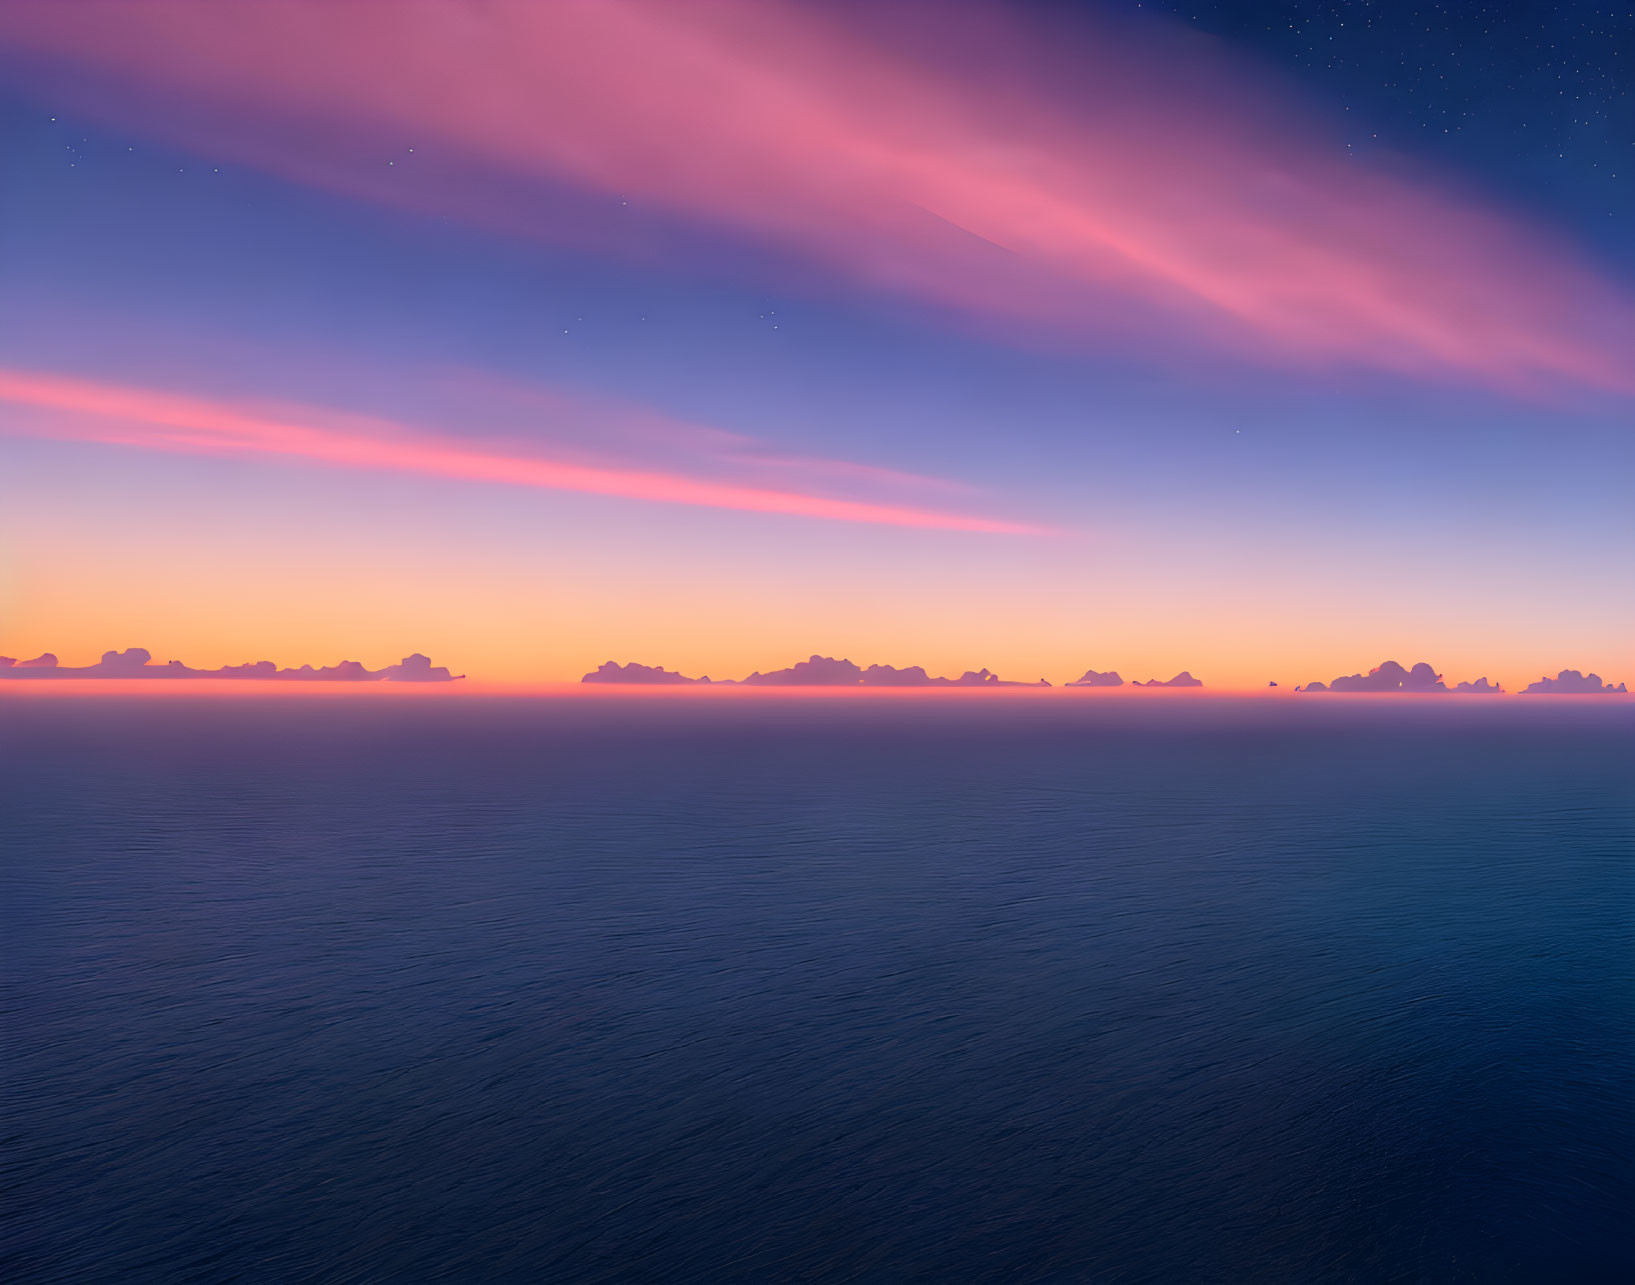 Ocean at Twilight with Scattered Clouds and Stars